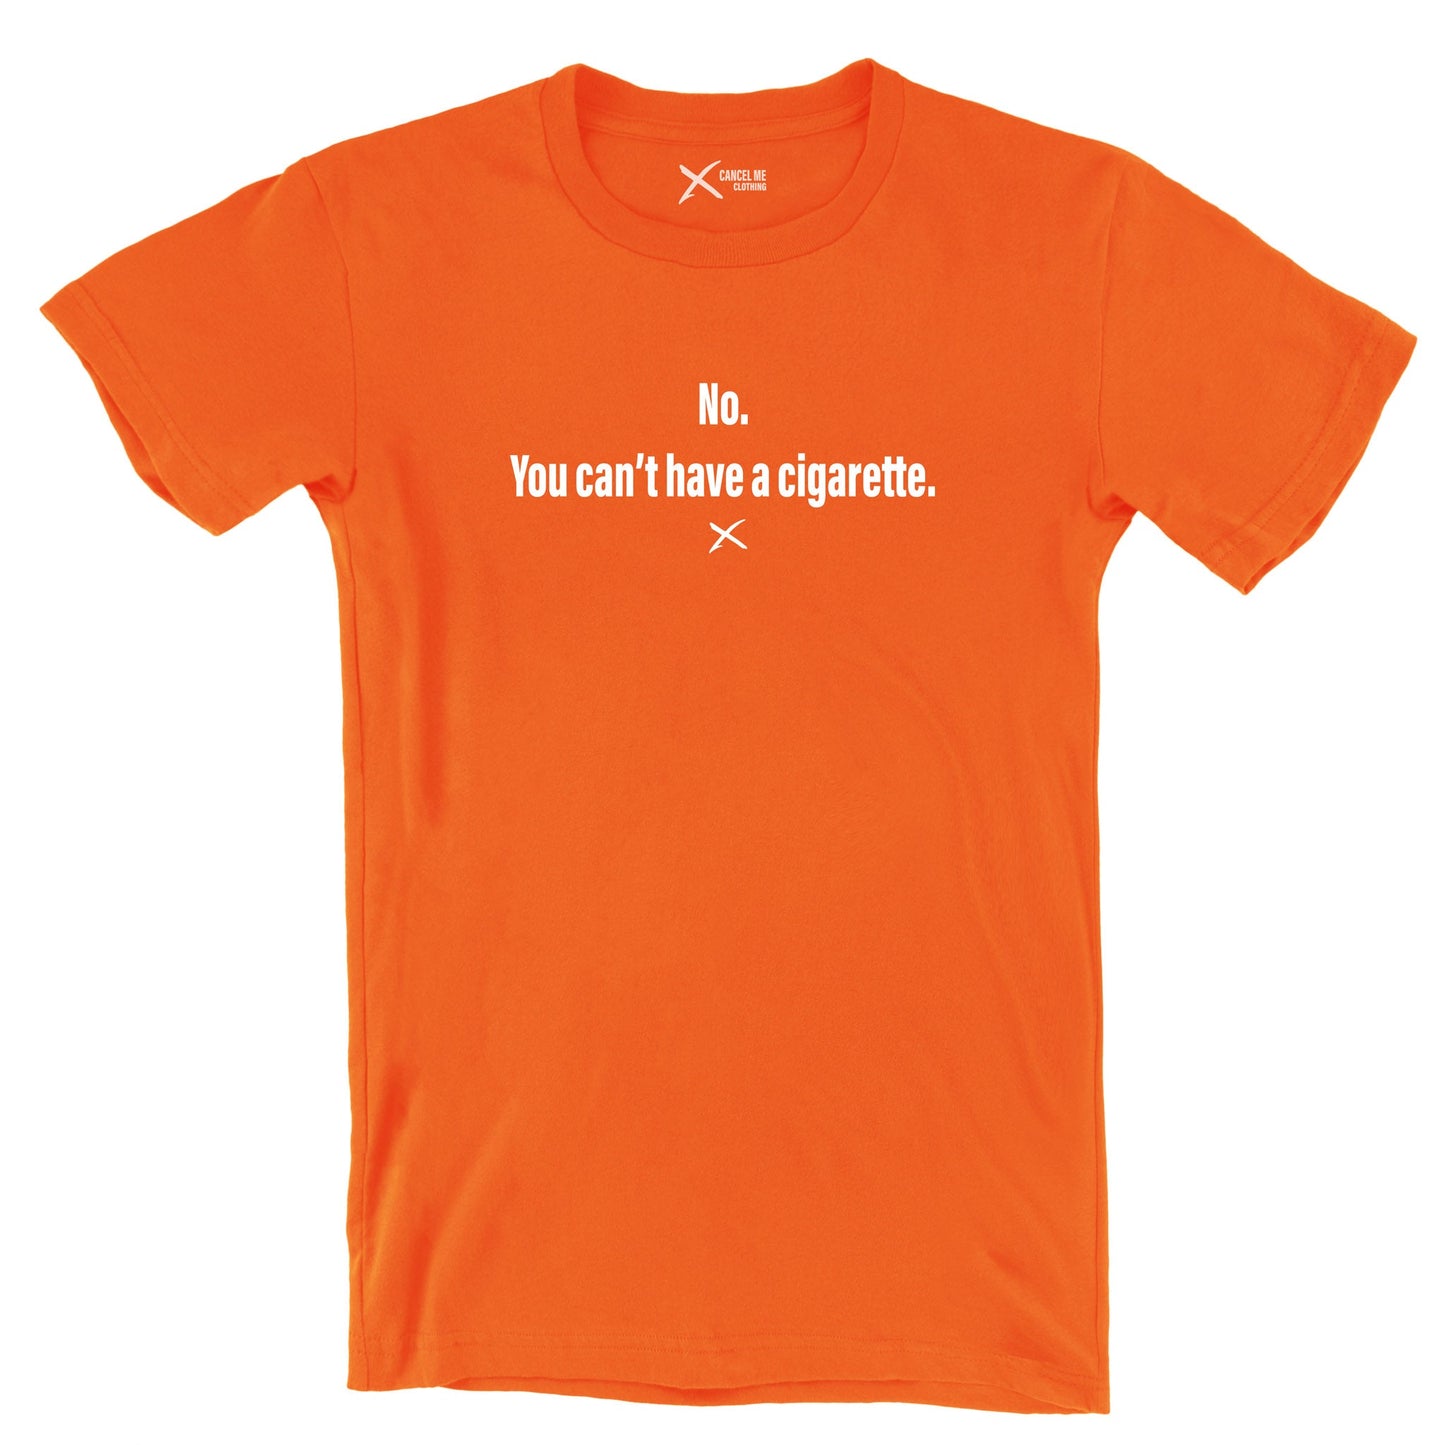 No. You can't have a cigarette. - Shirt